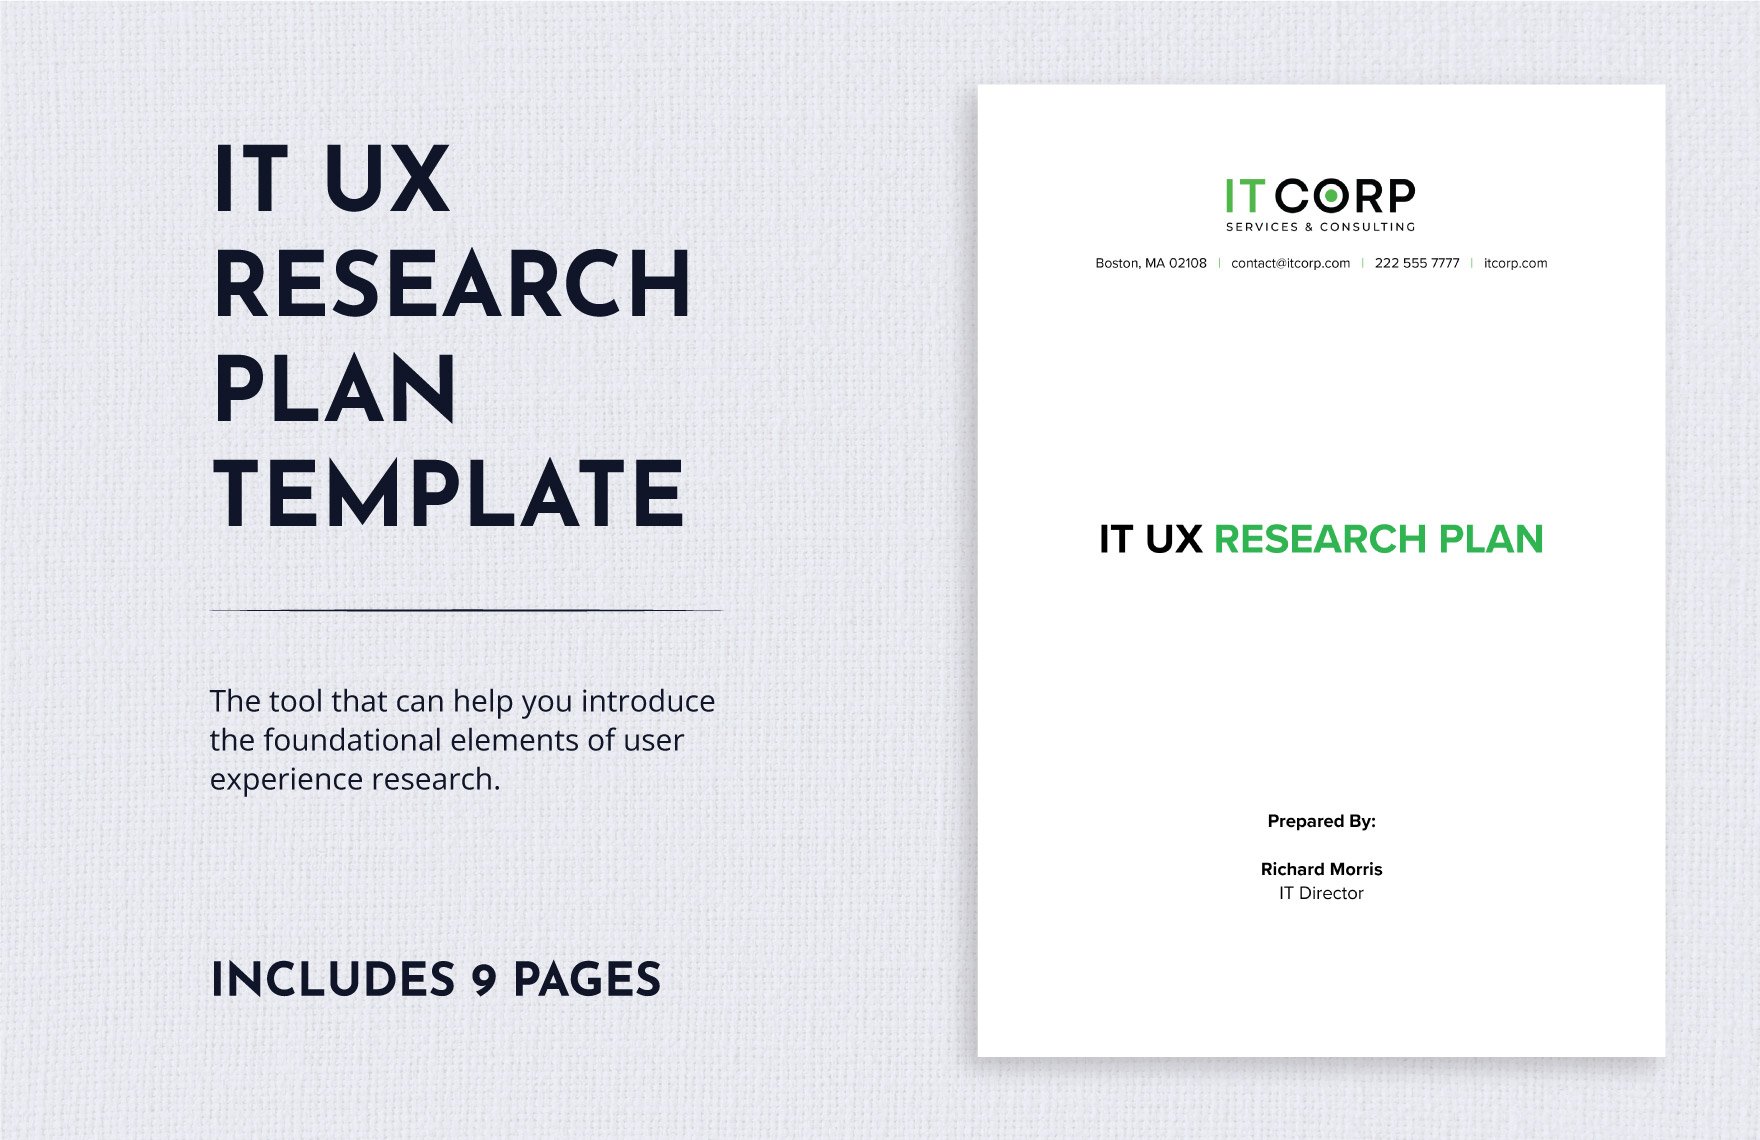 IT UX Research Plan Template